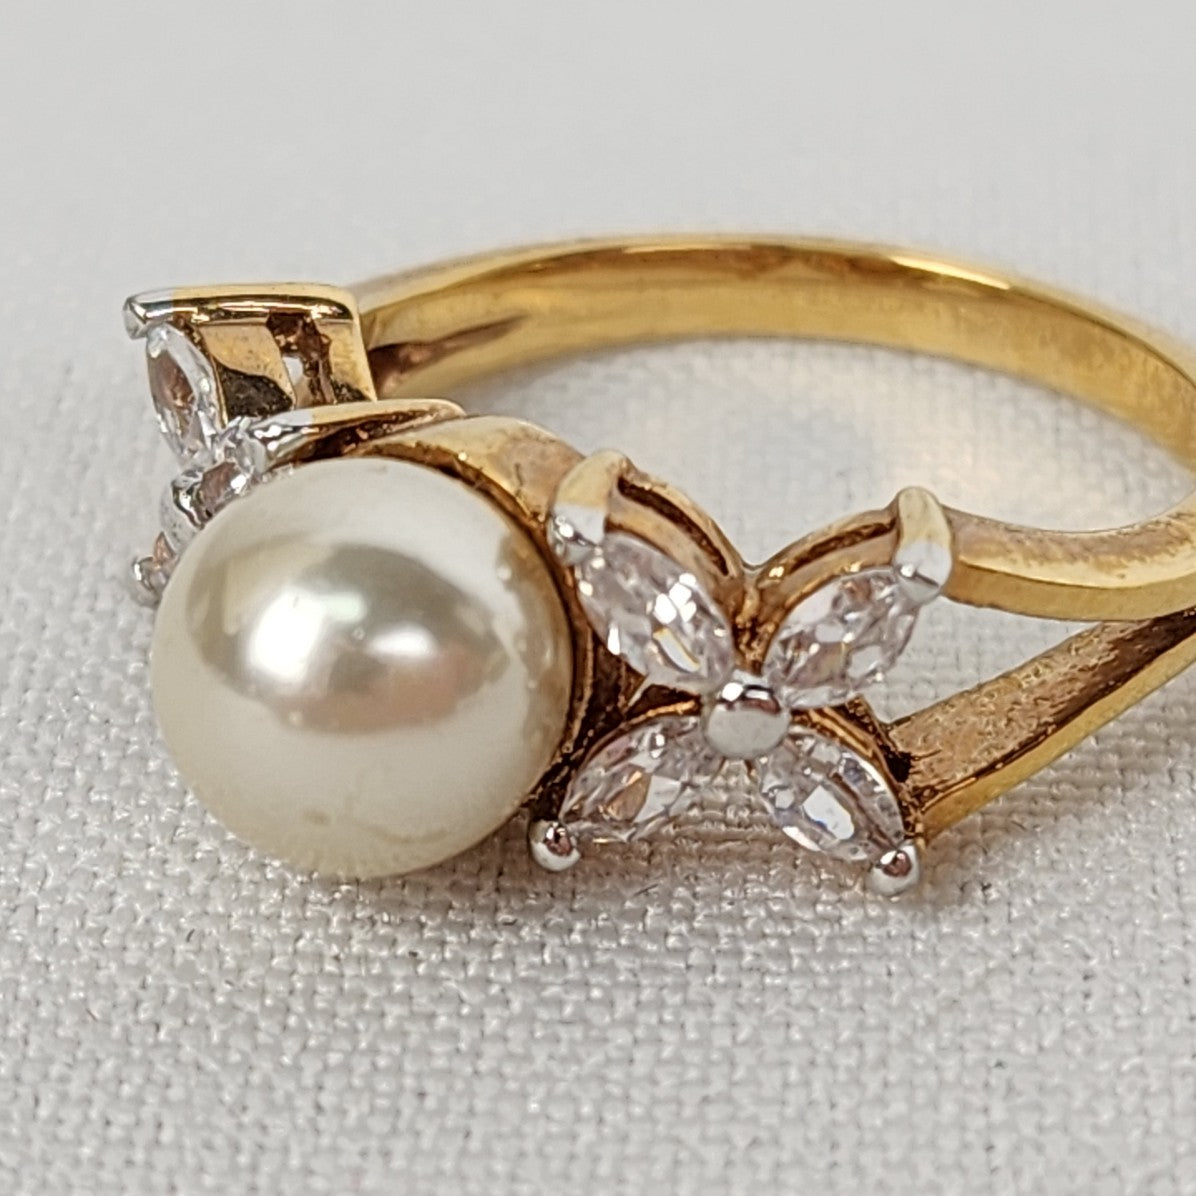 Vintage Gold Tone Faux Pearl Crystal Ring Size 8